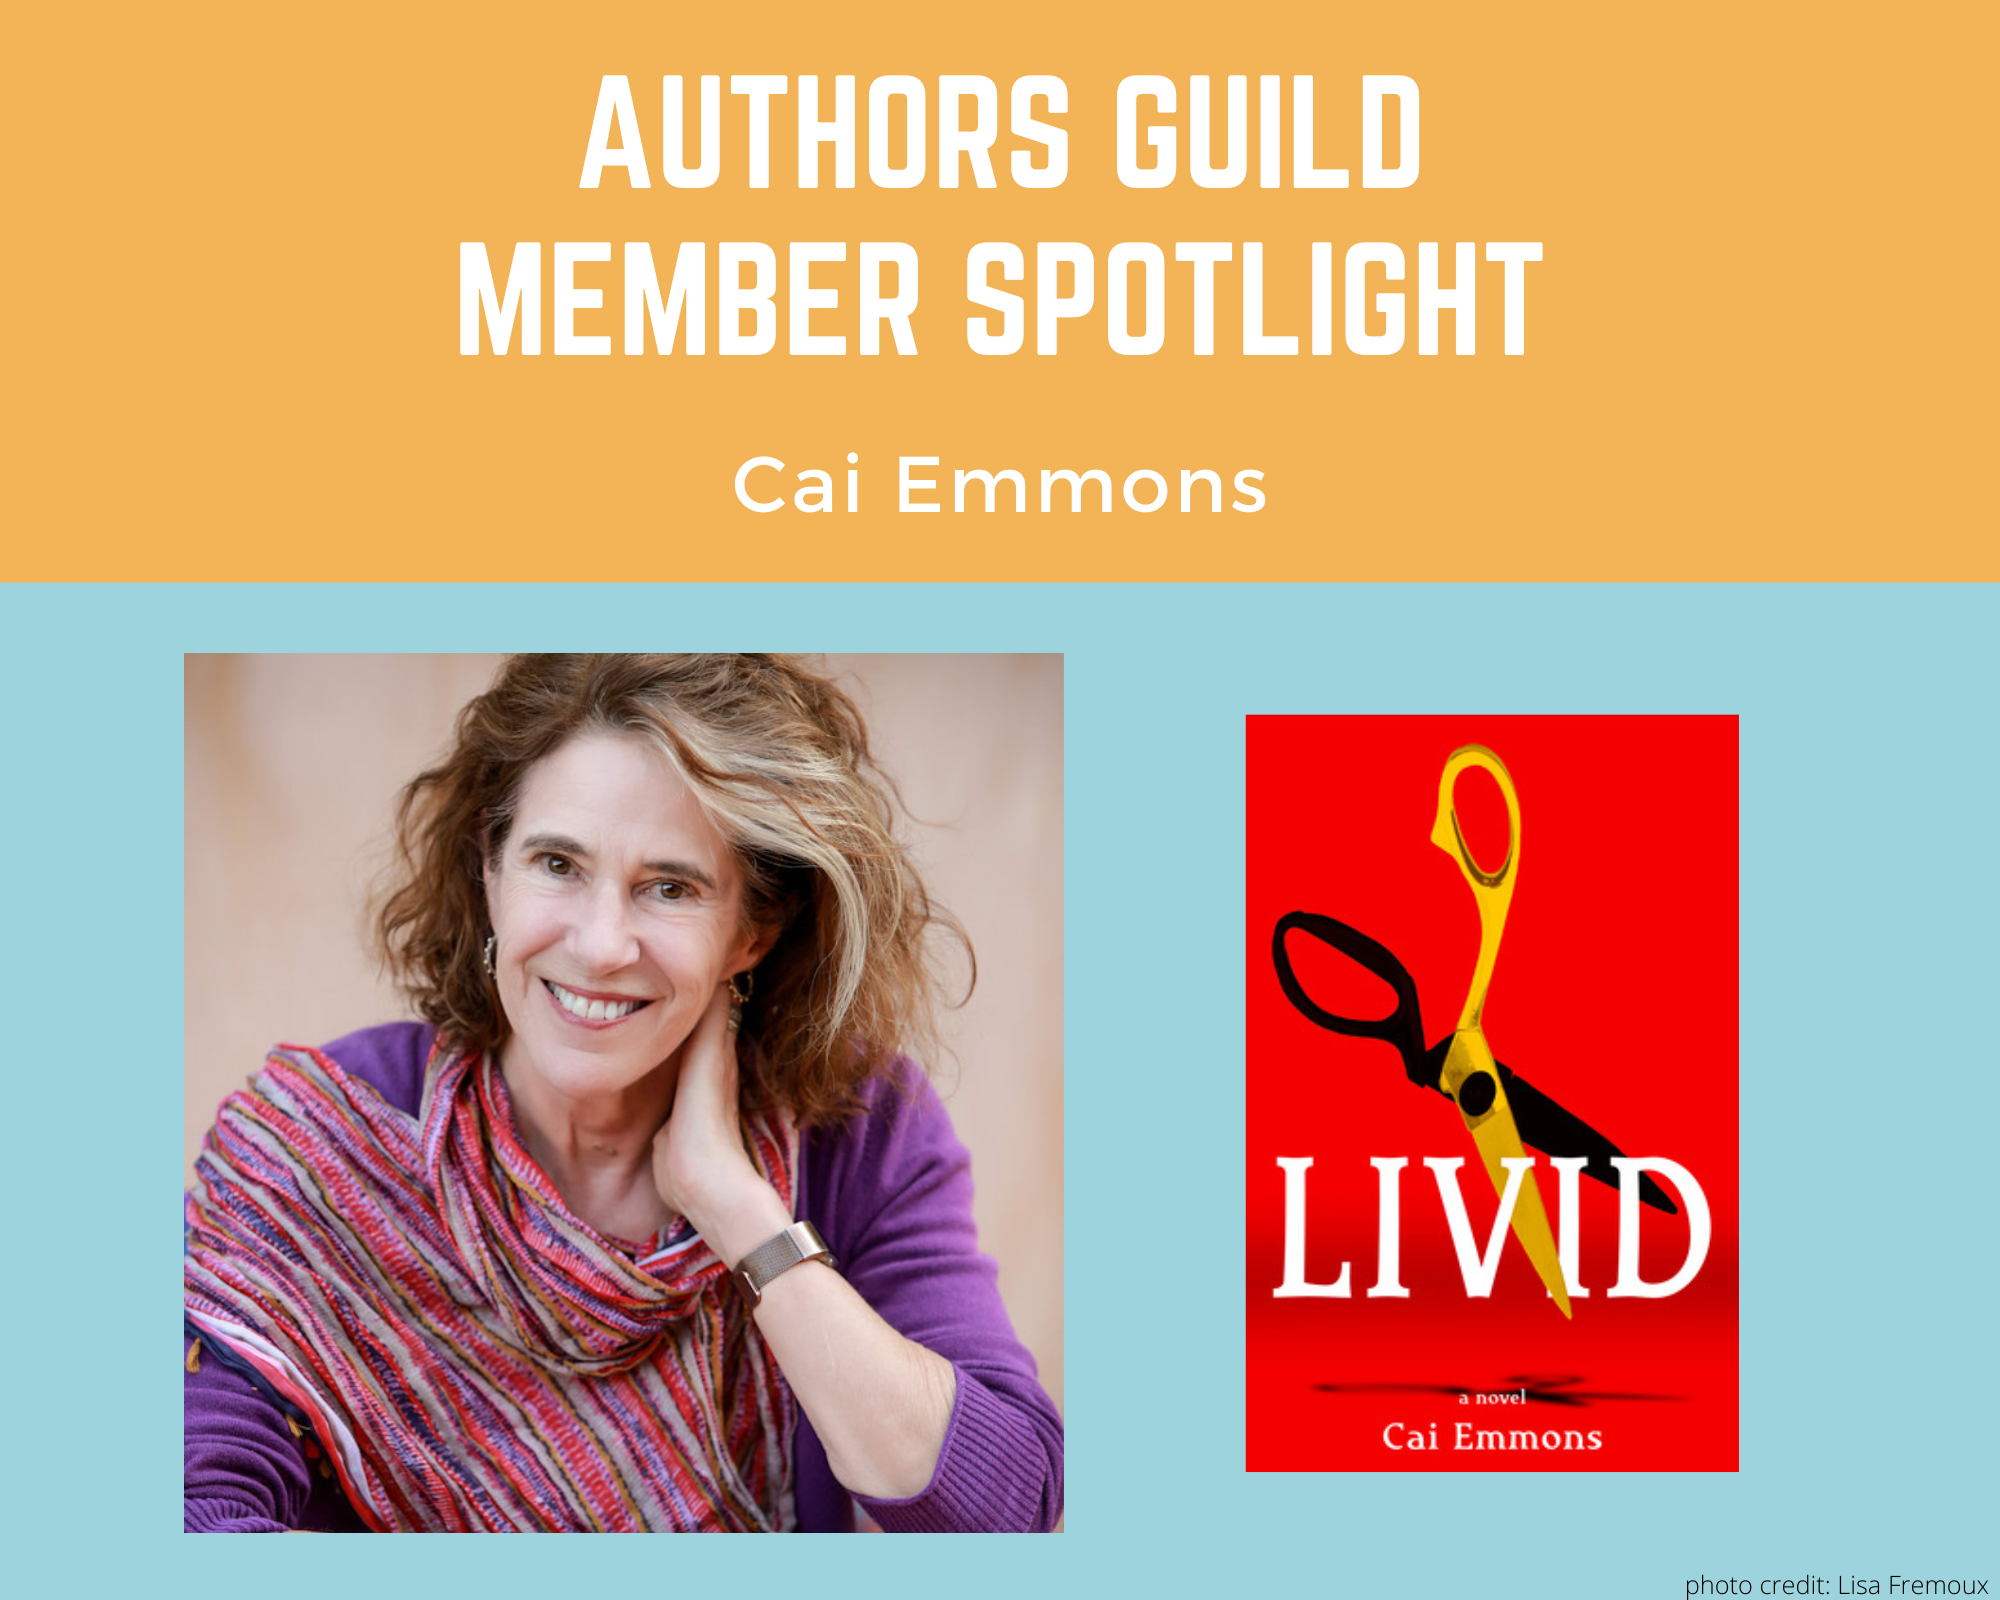 author Cai Emmons smiling at the camera and an image of her book Livid